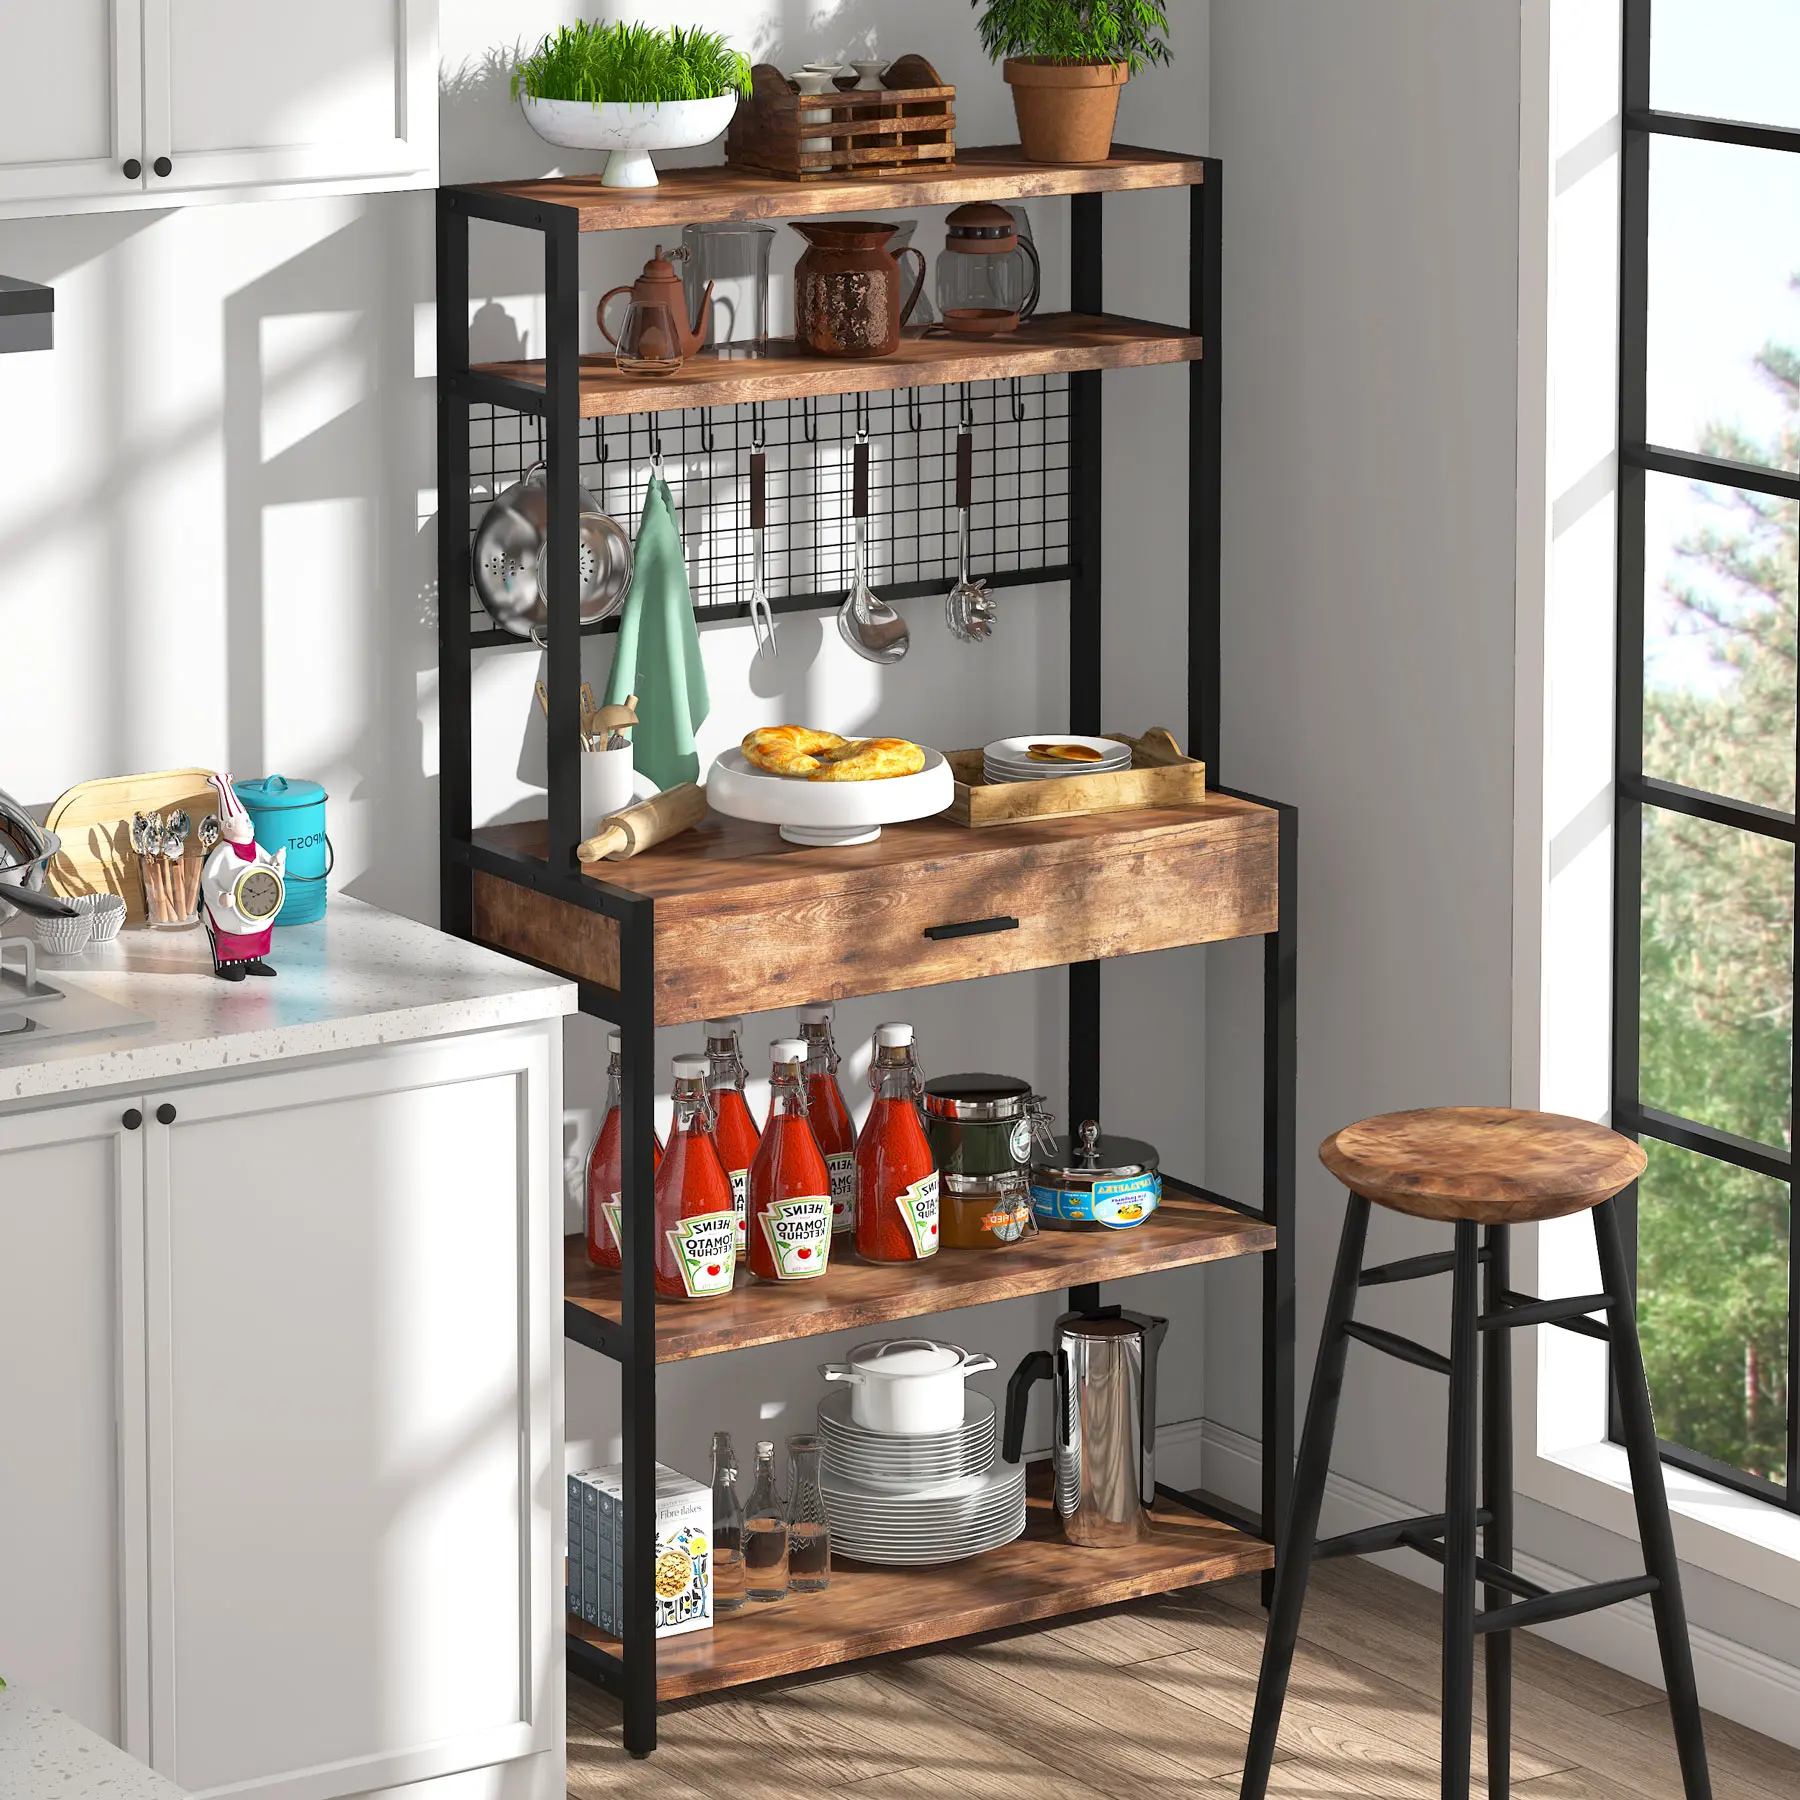 Dropshipping Microwave Stand Bakers Rack Kitchen Storage Stand Shelf Rack 5-tier Kitchen Bakers Rack